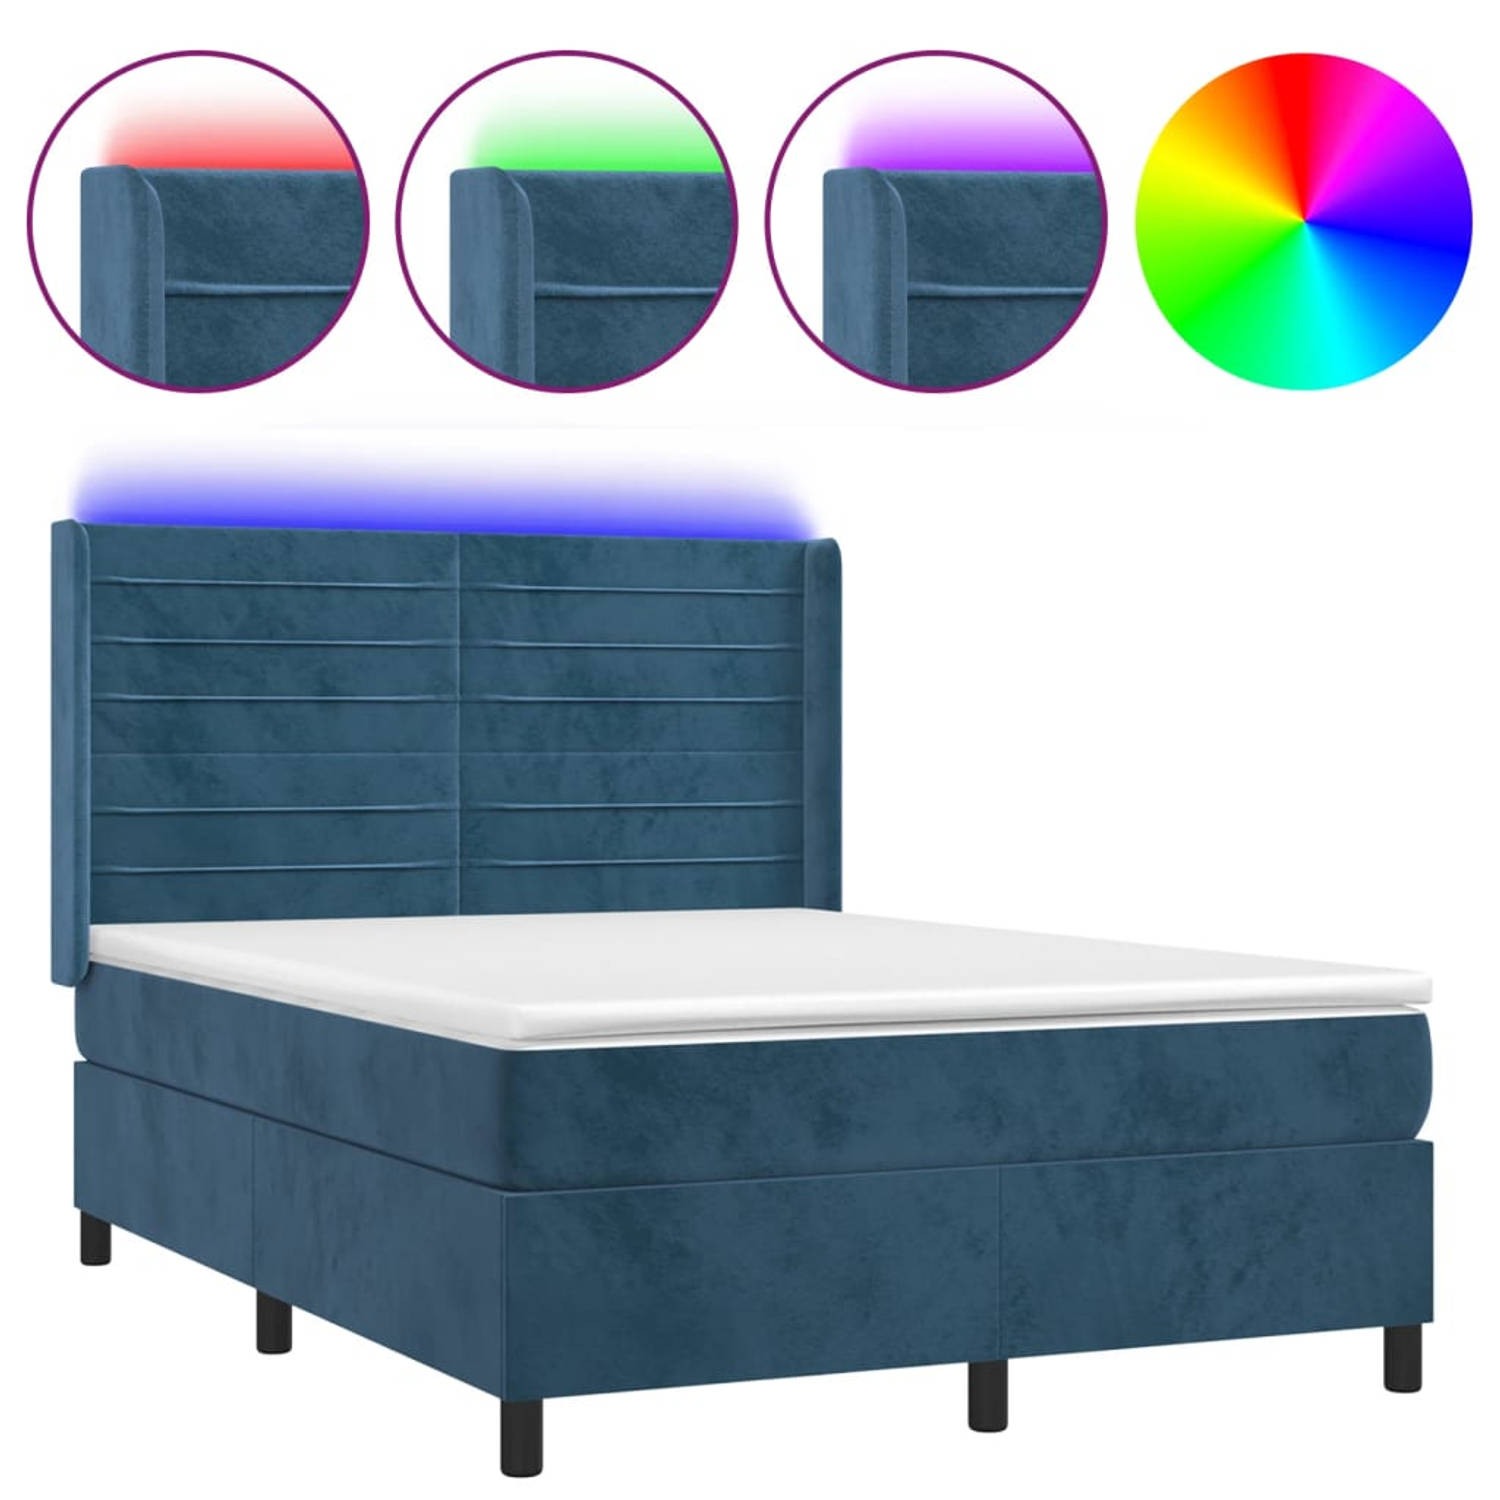 The Living Store Boxspring Bed - Donkerblauw Fluweel - 193x147x118/128cm - Met LED